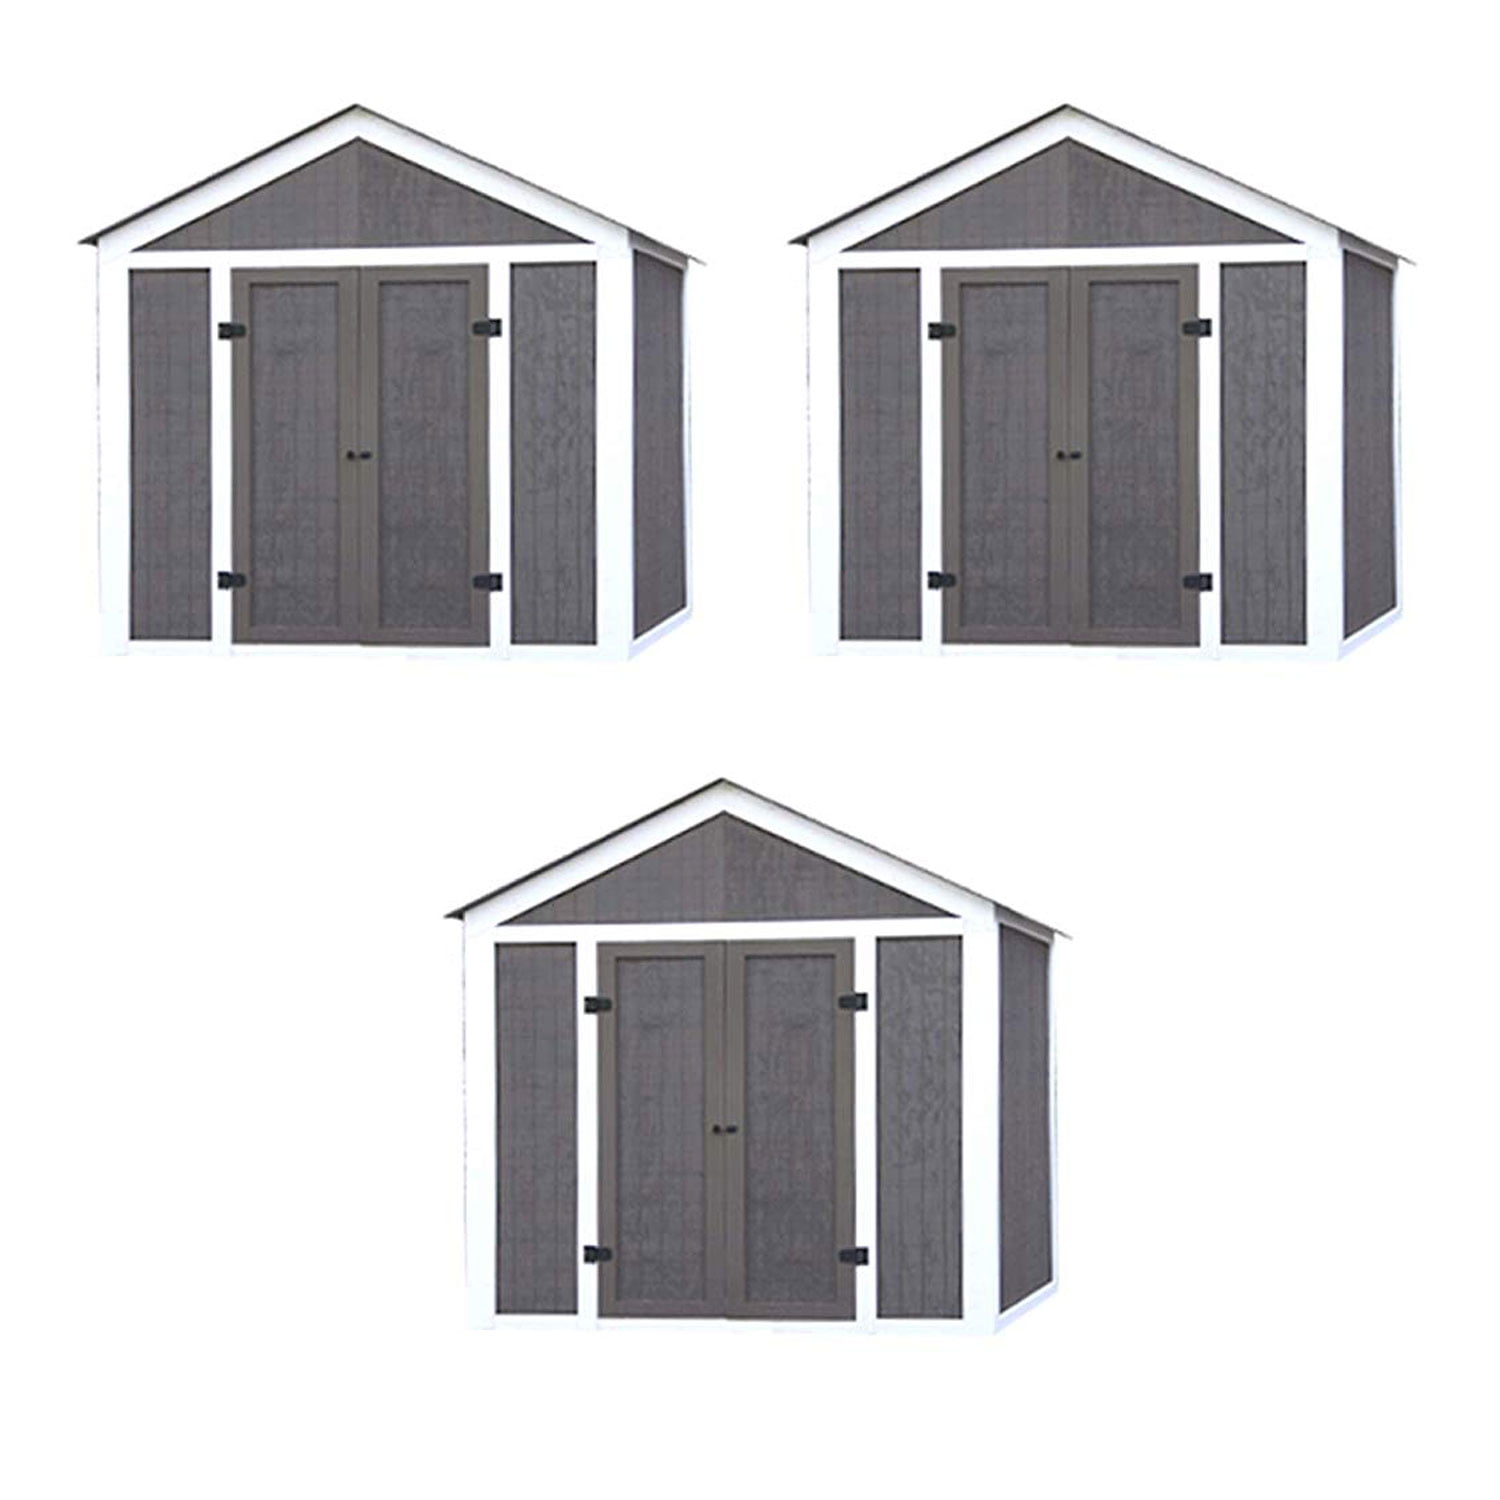 EZ Shed 70188 Barn Style Instant Framing Kit 2 to 3 Days for sale online 